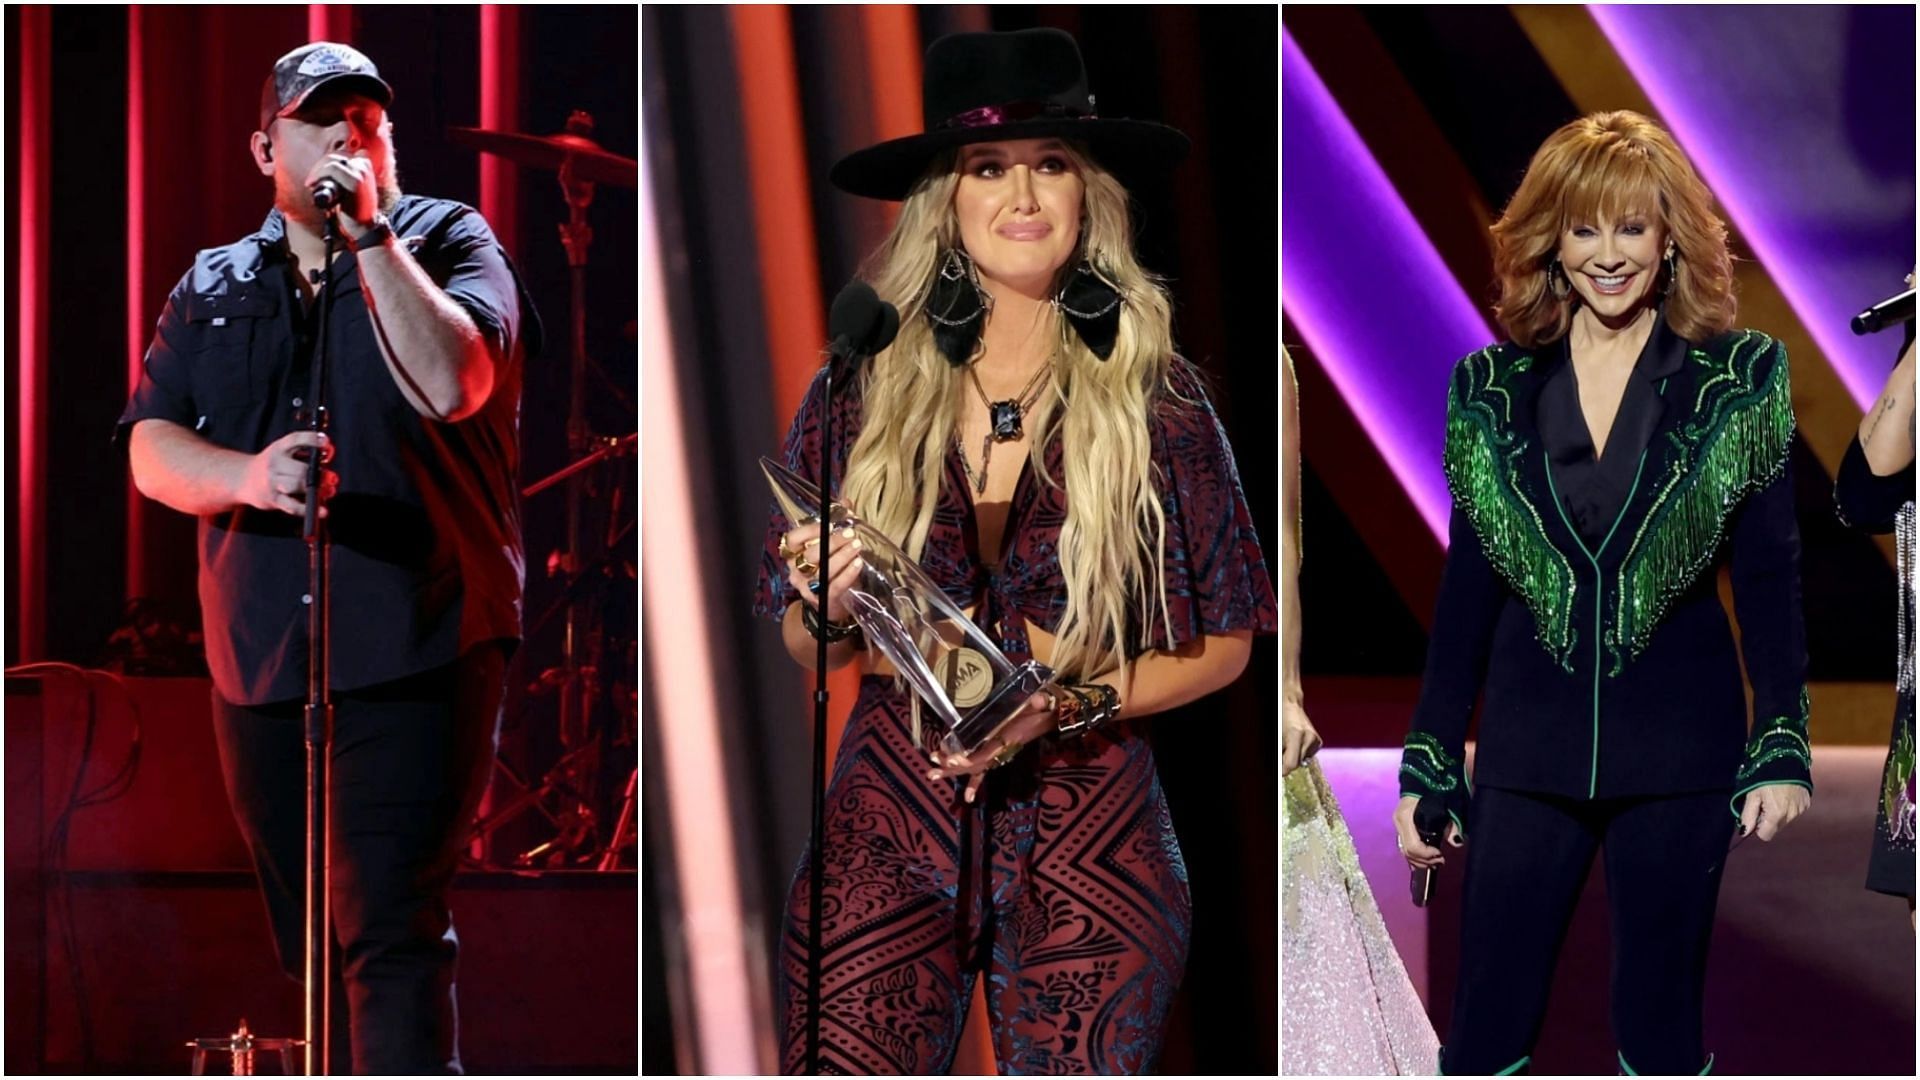 Luke Combs and Lainey Wilson were among the winners at the CMA 2022 awards. (Images via Getty)